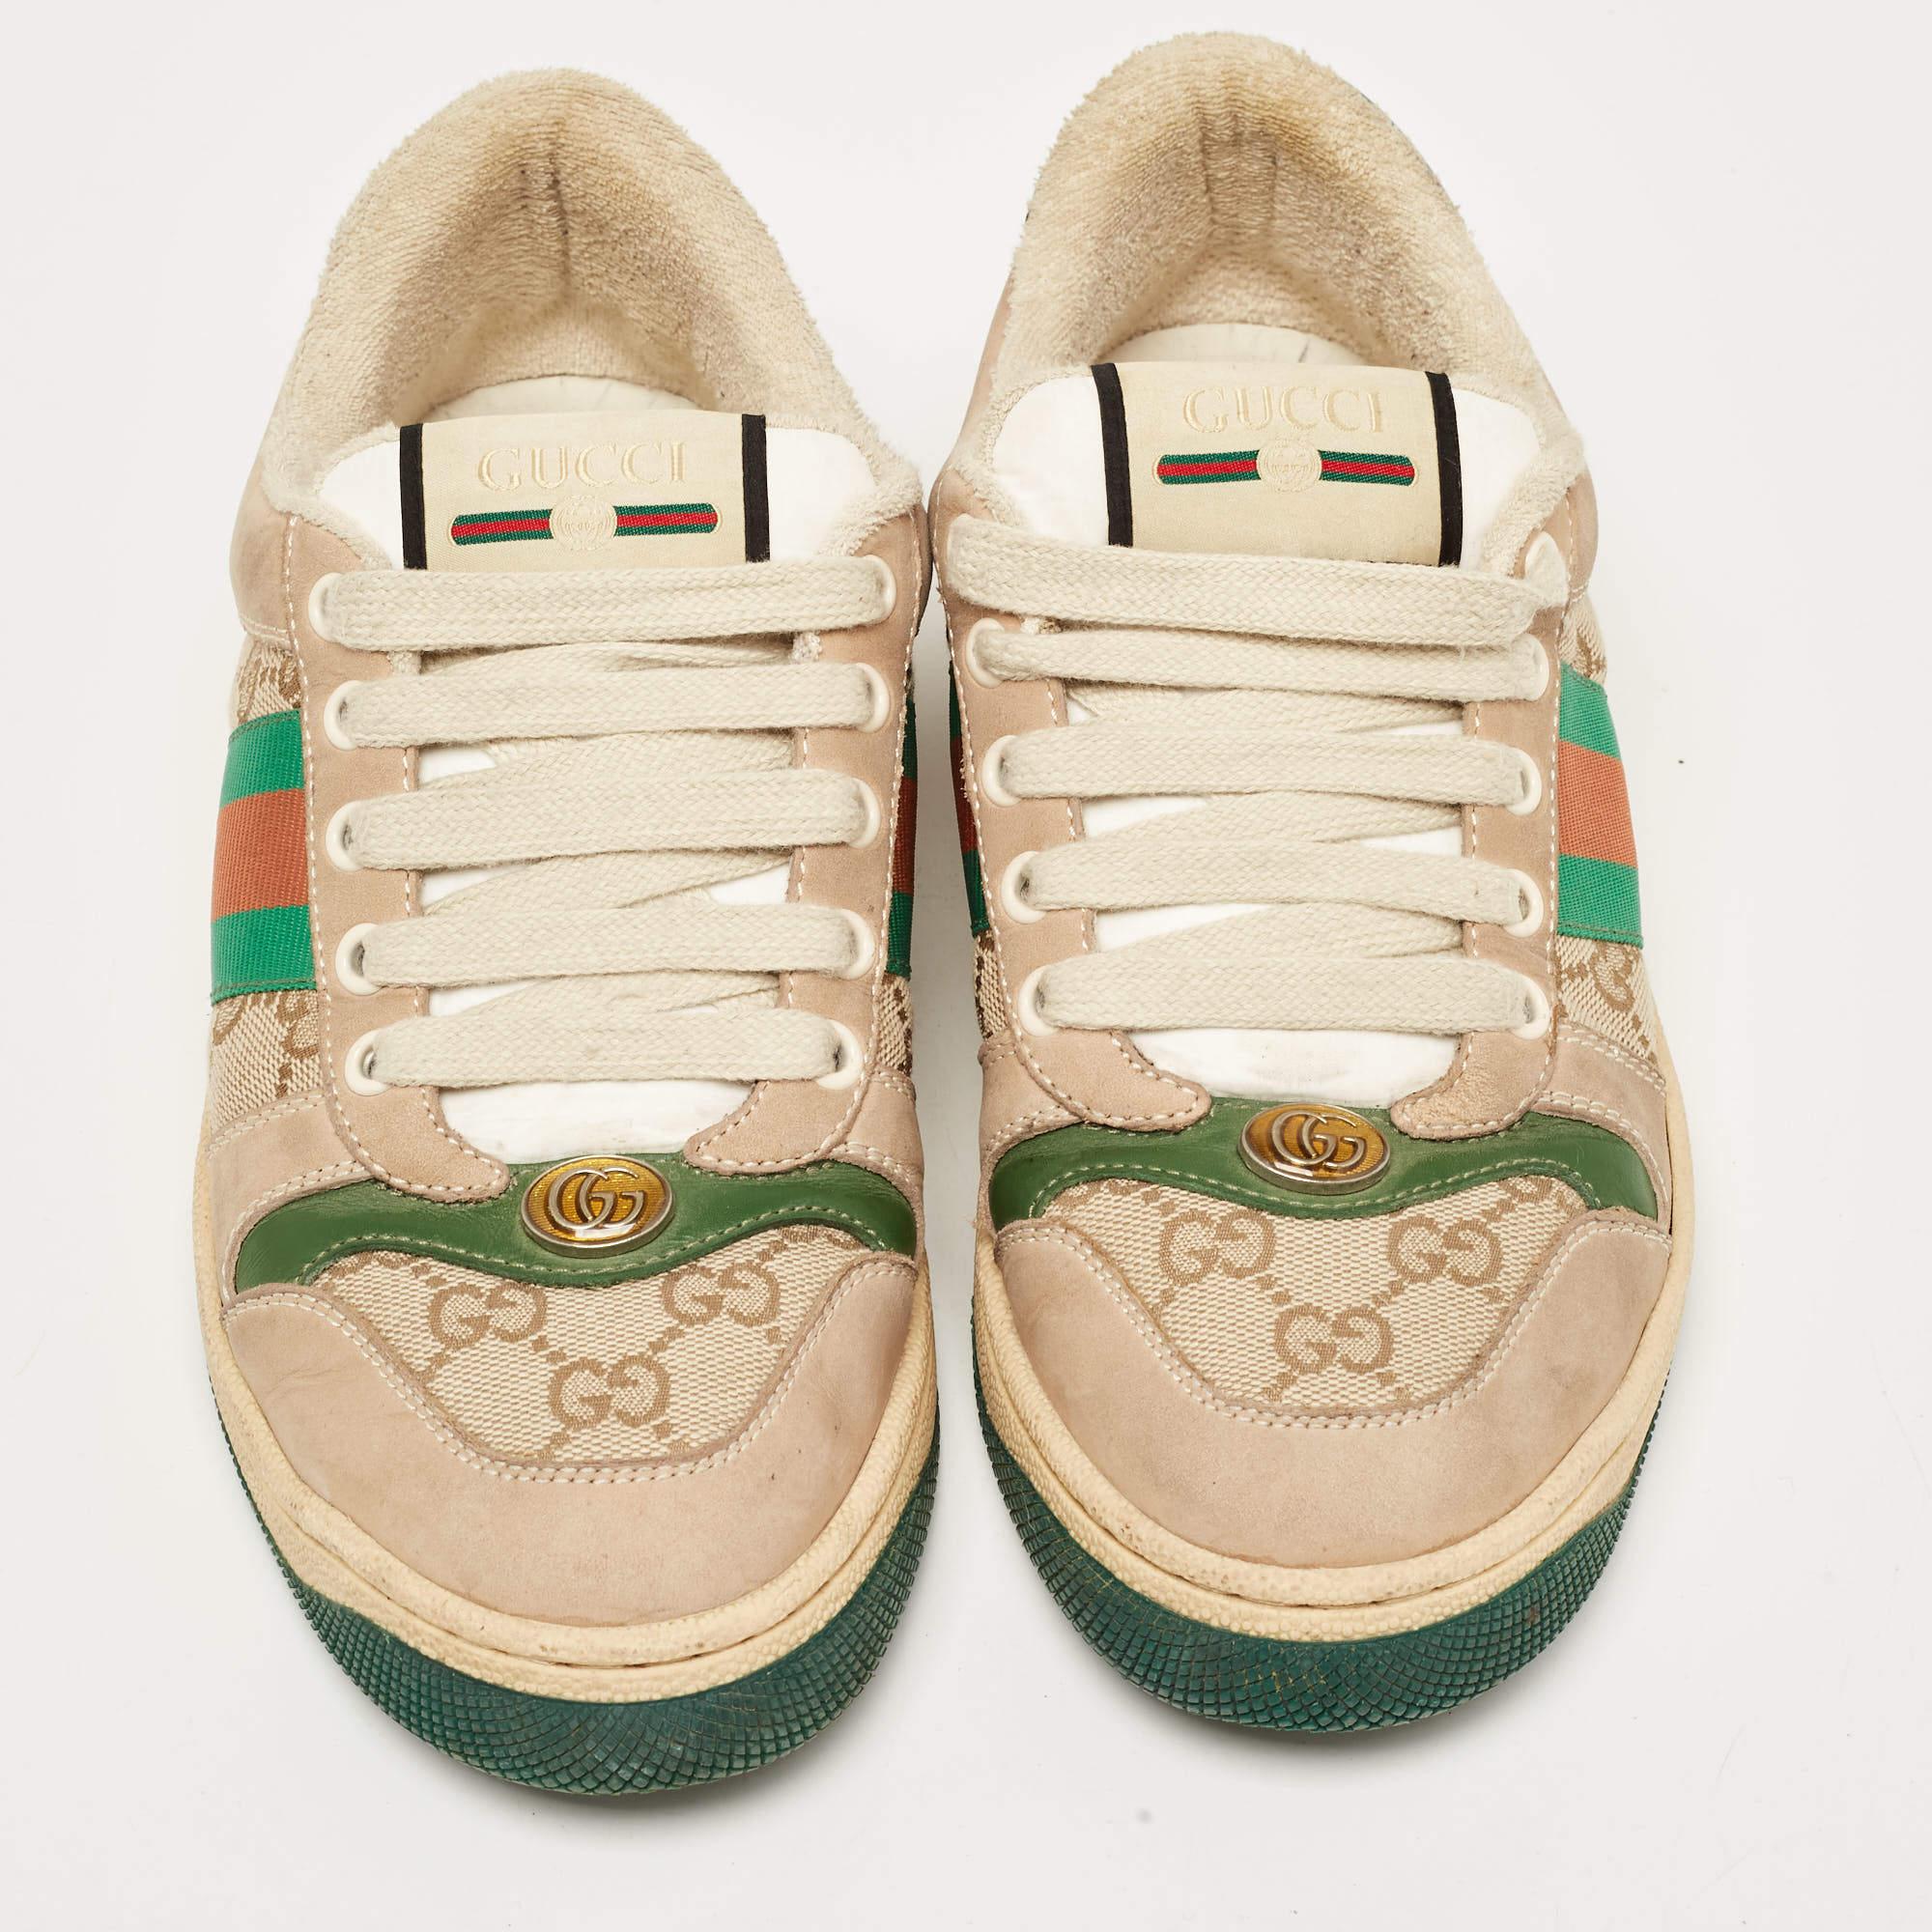 Women's Gucci Multicolor Nubuck and Leather Screener Sneakers Size 37